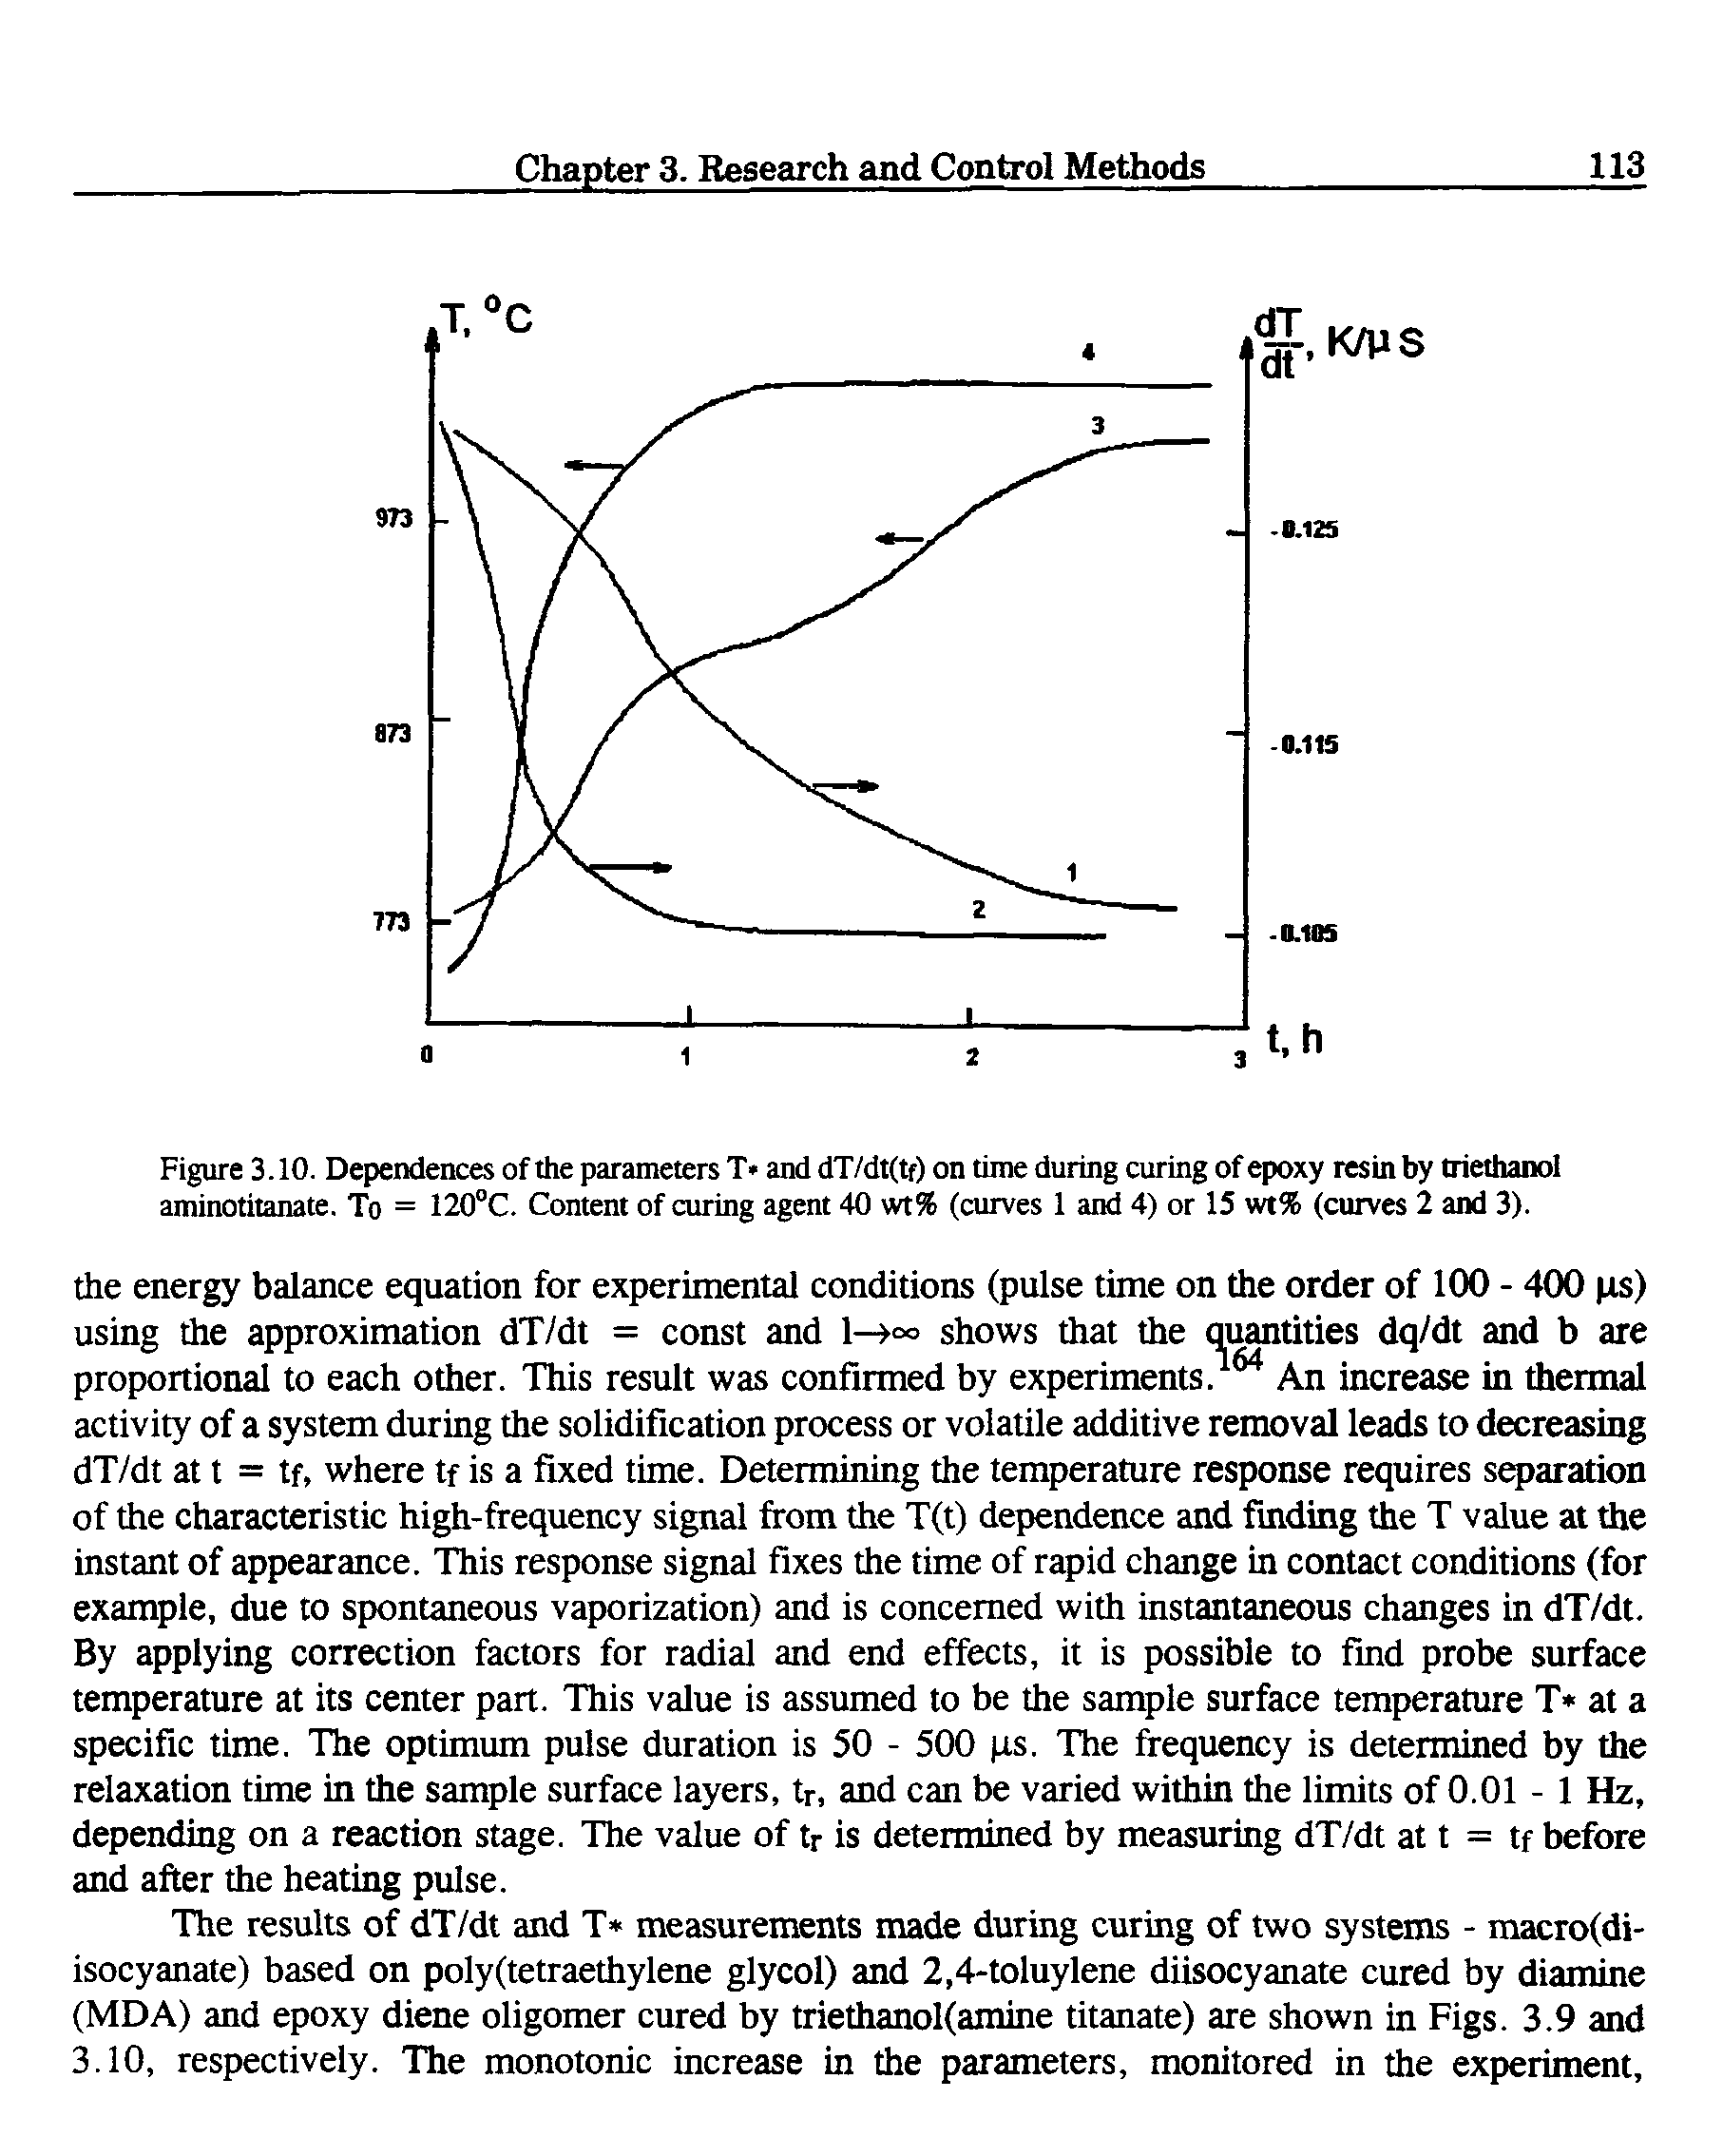 Figure 3.10. Dependences of the parameters T and dT/dt(tf) on time during curing of epoxy resin by triethanol aminotitanate. To = 120°C. Content of curing agent 40 wt% (curves 1 and 4) or 15 wt% (curves 2 and 3).